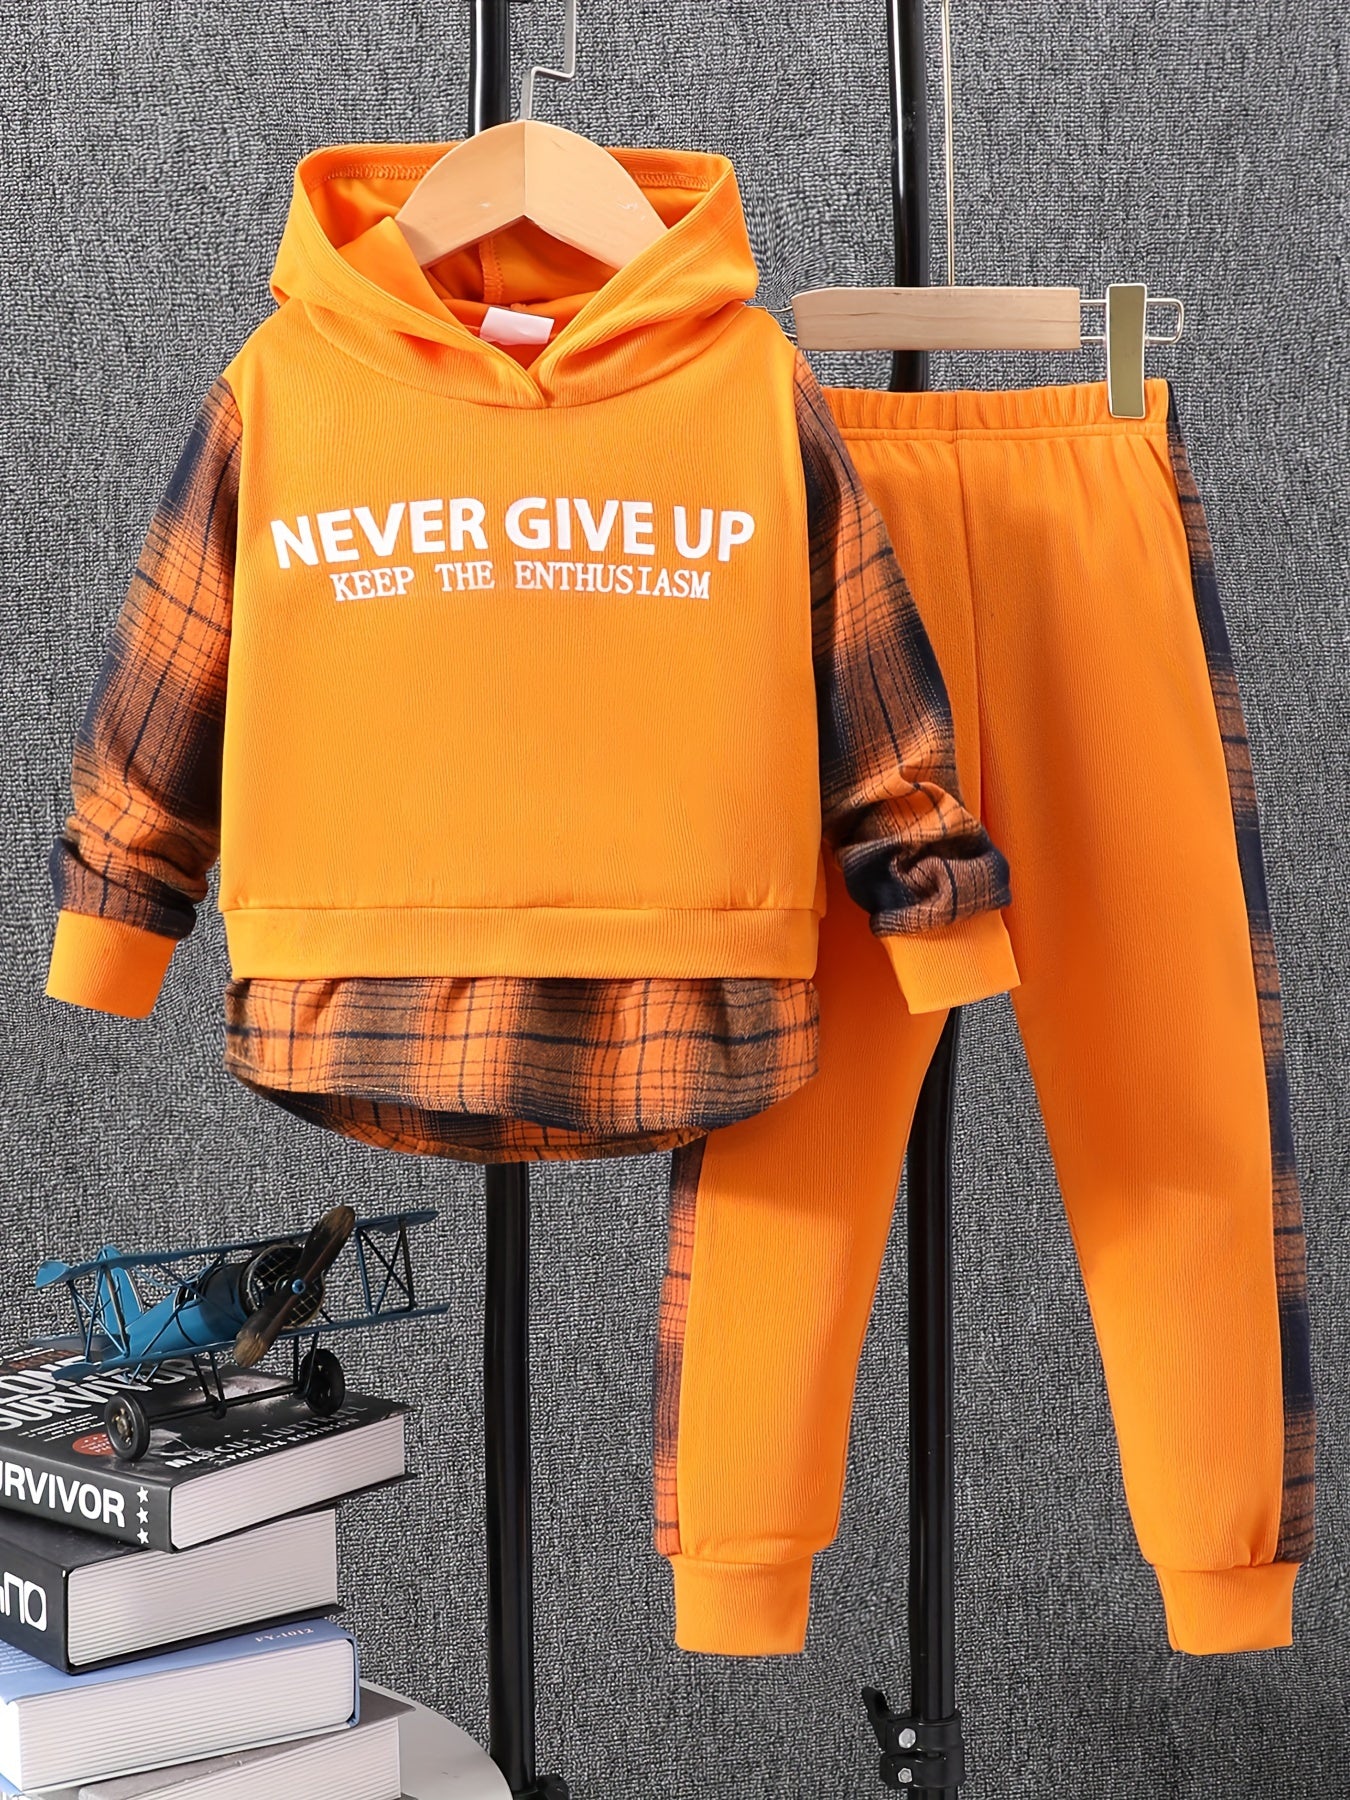 Never Give Up Keep The Enthusiasm Youth Christian Casual Outfit claimedbygoddesigns